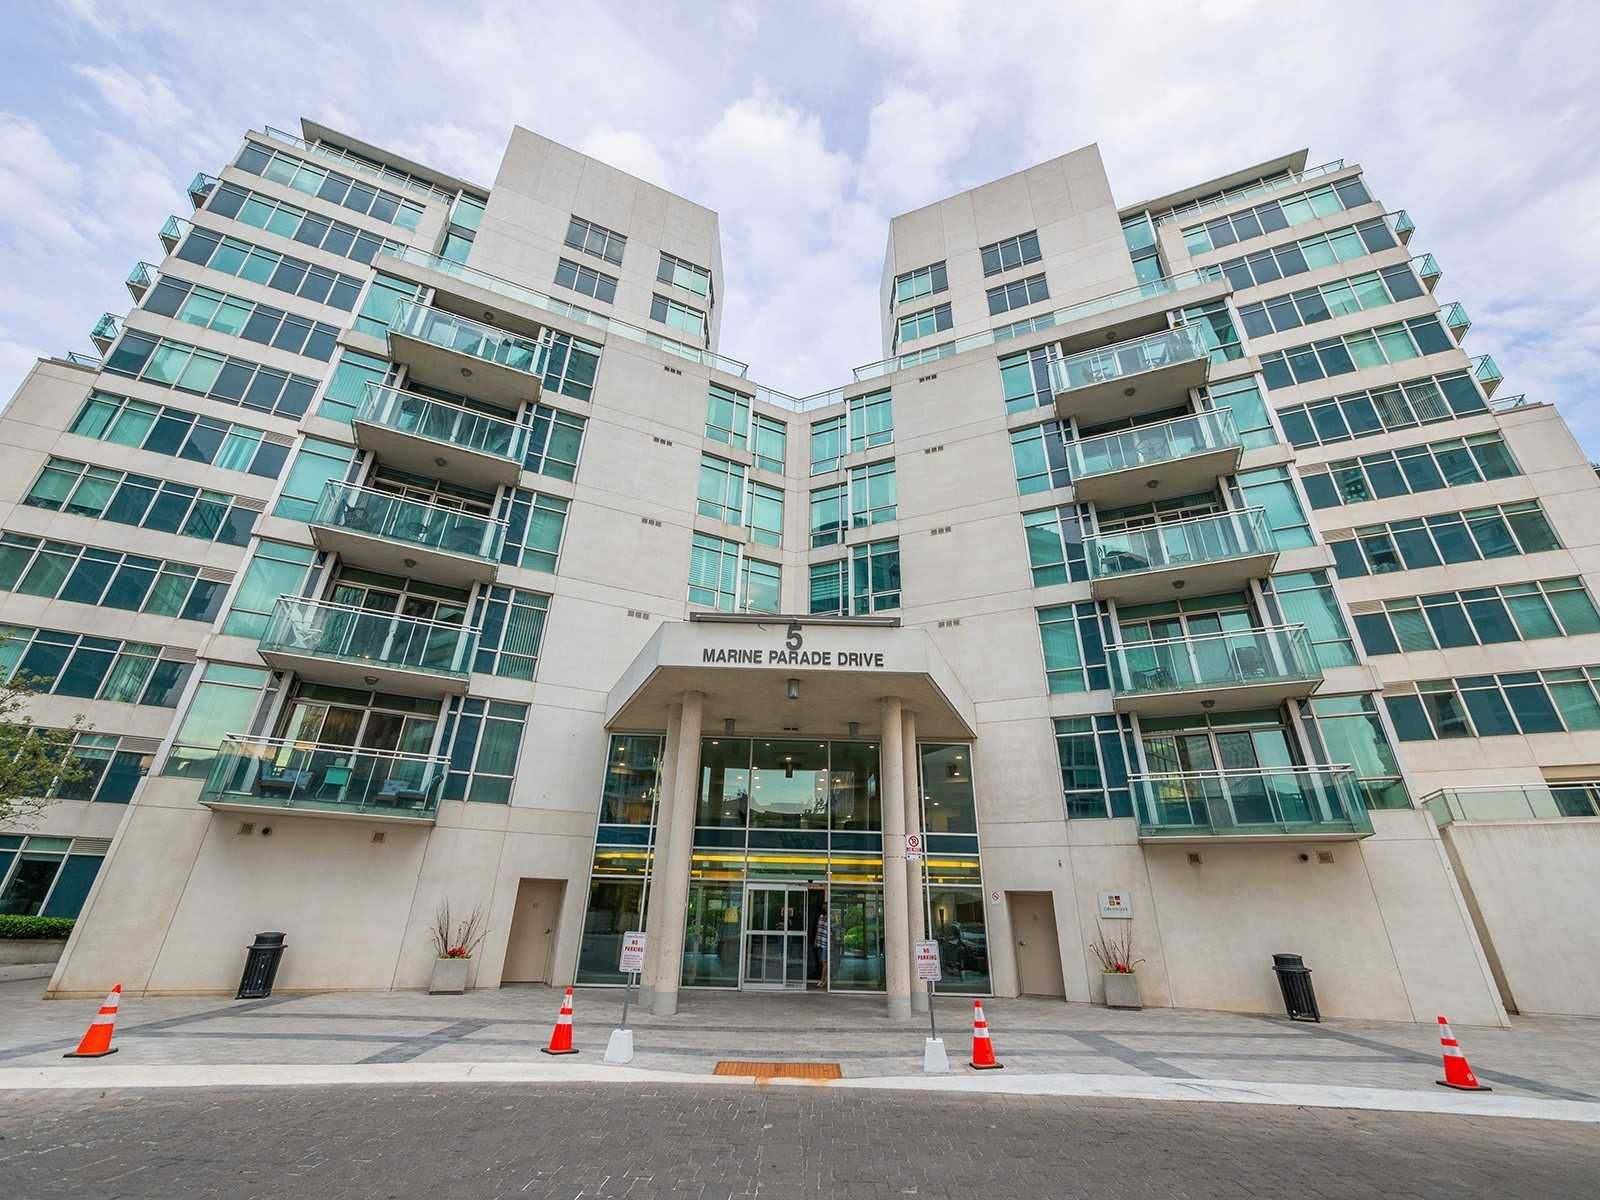 5 Marine Parade Dr. This condo at Grenadier Landing Condos is located in  Etobicoke, Toronto - image #2 of 2 by Strata.ca